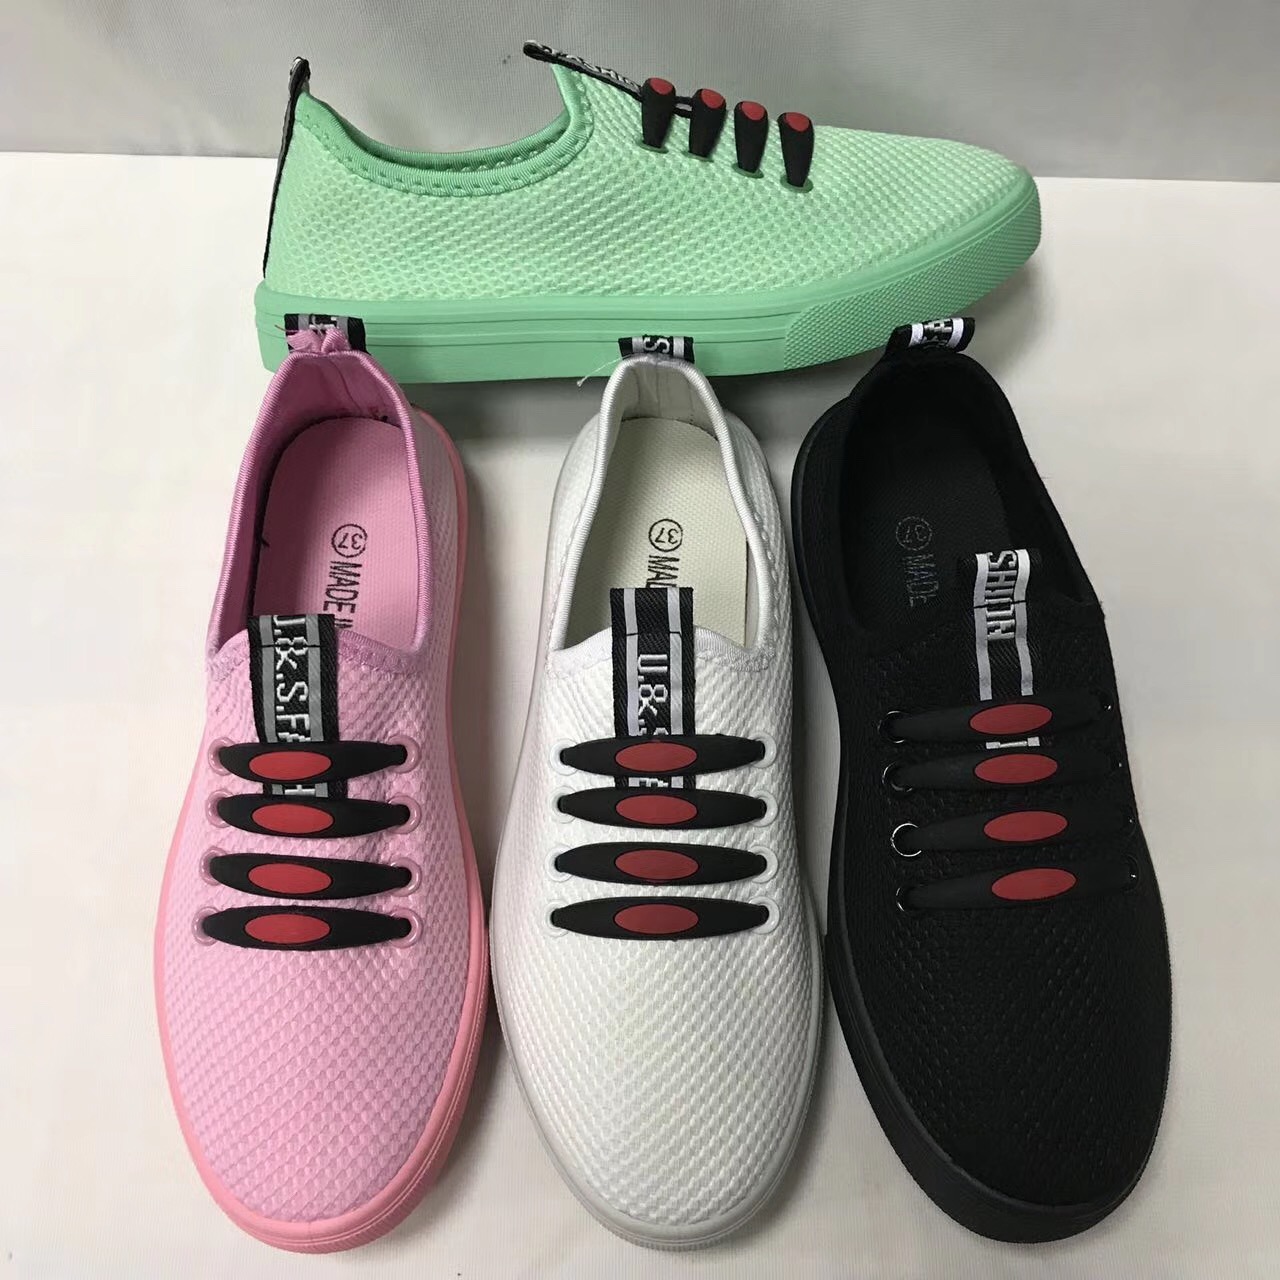 Vintage Style Plain Colorful Mesh Breathable Casual Sneakers Footwear Shoes